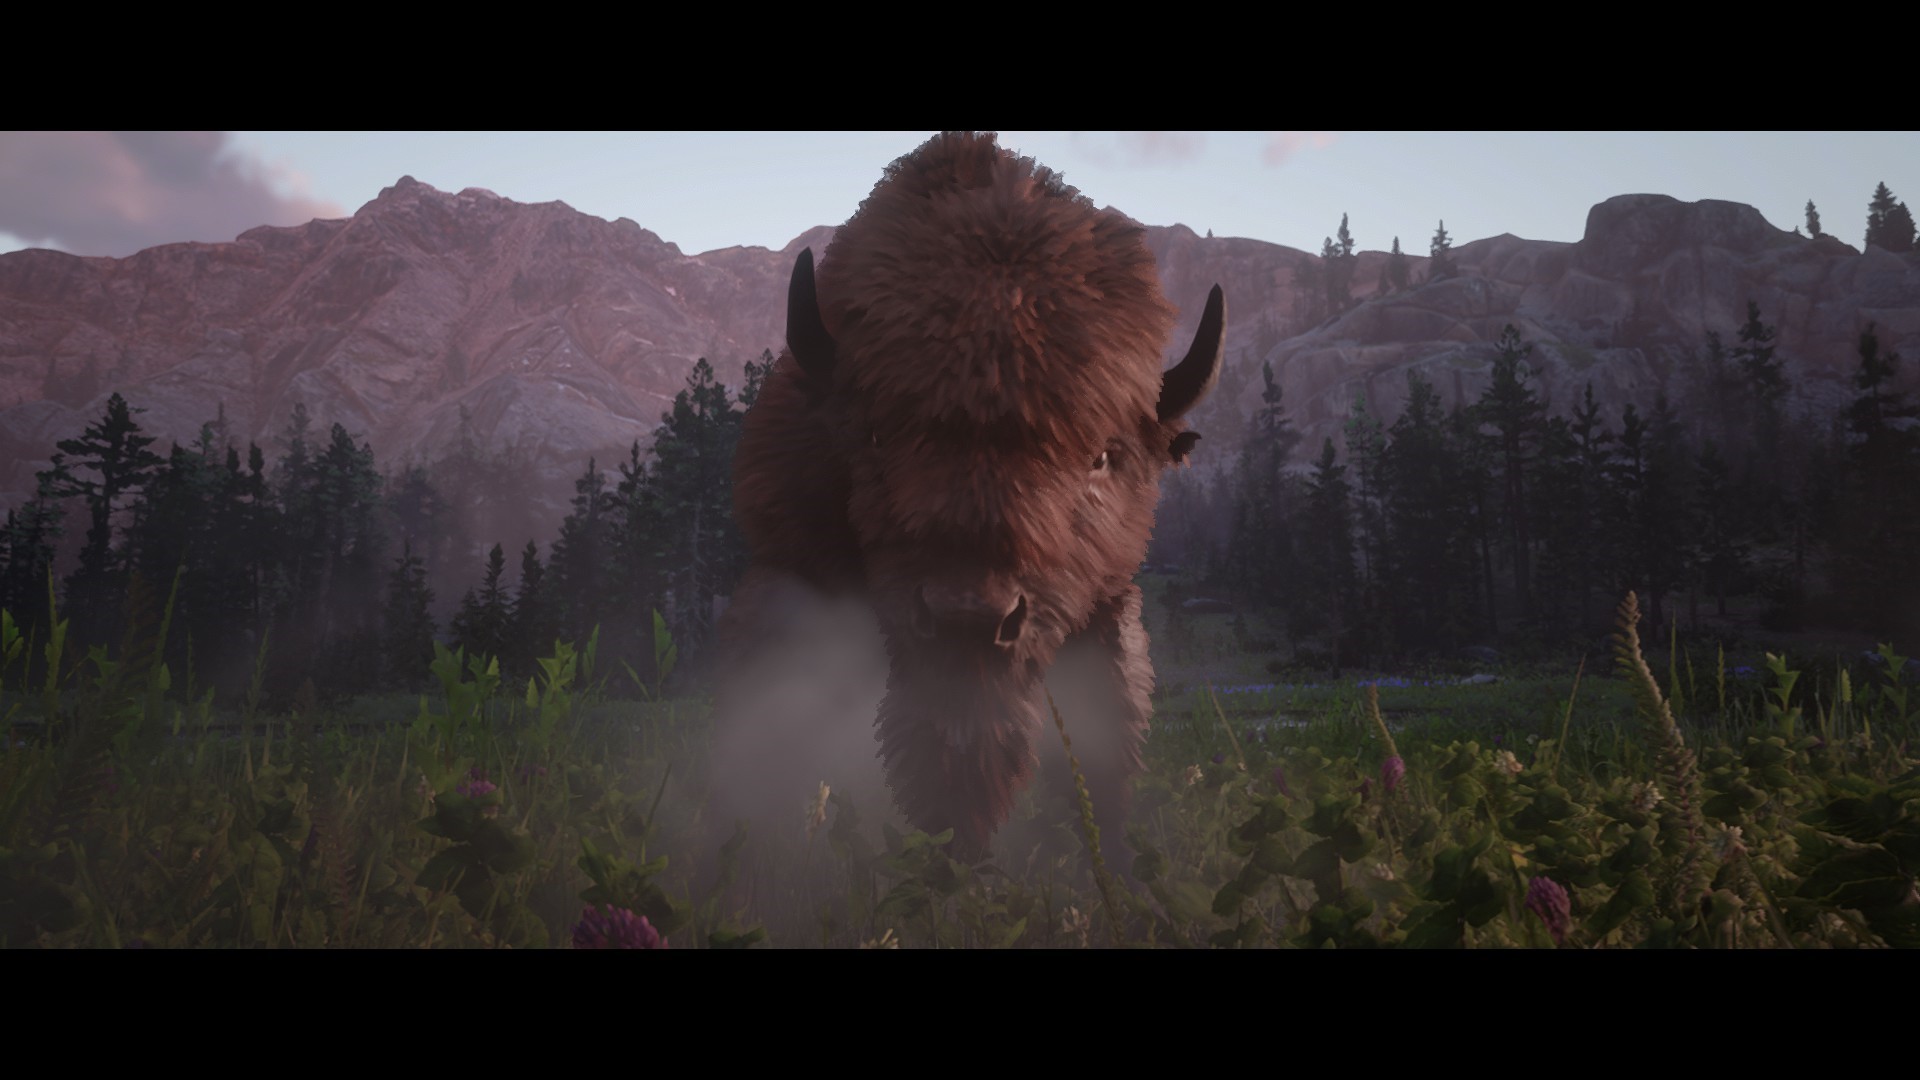 Legendary red bison in a field staring at the camera